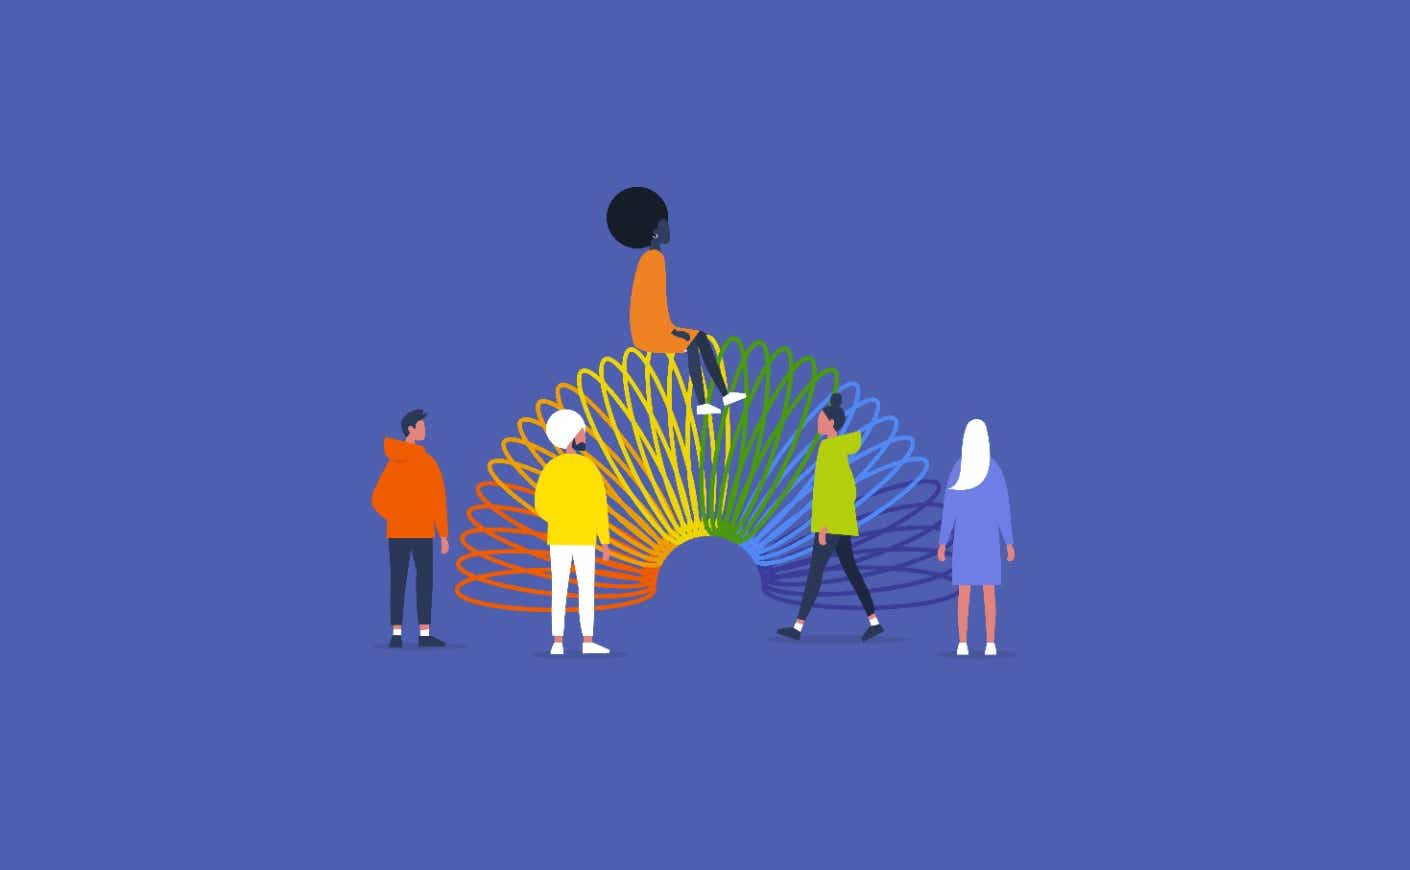 illustration of a rainbow slinky with people around it